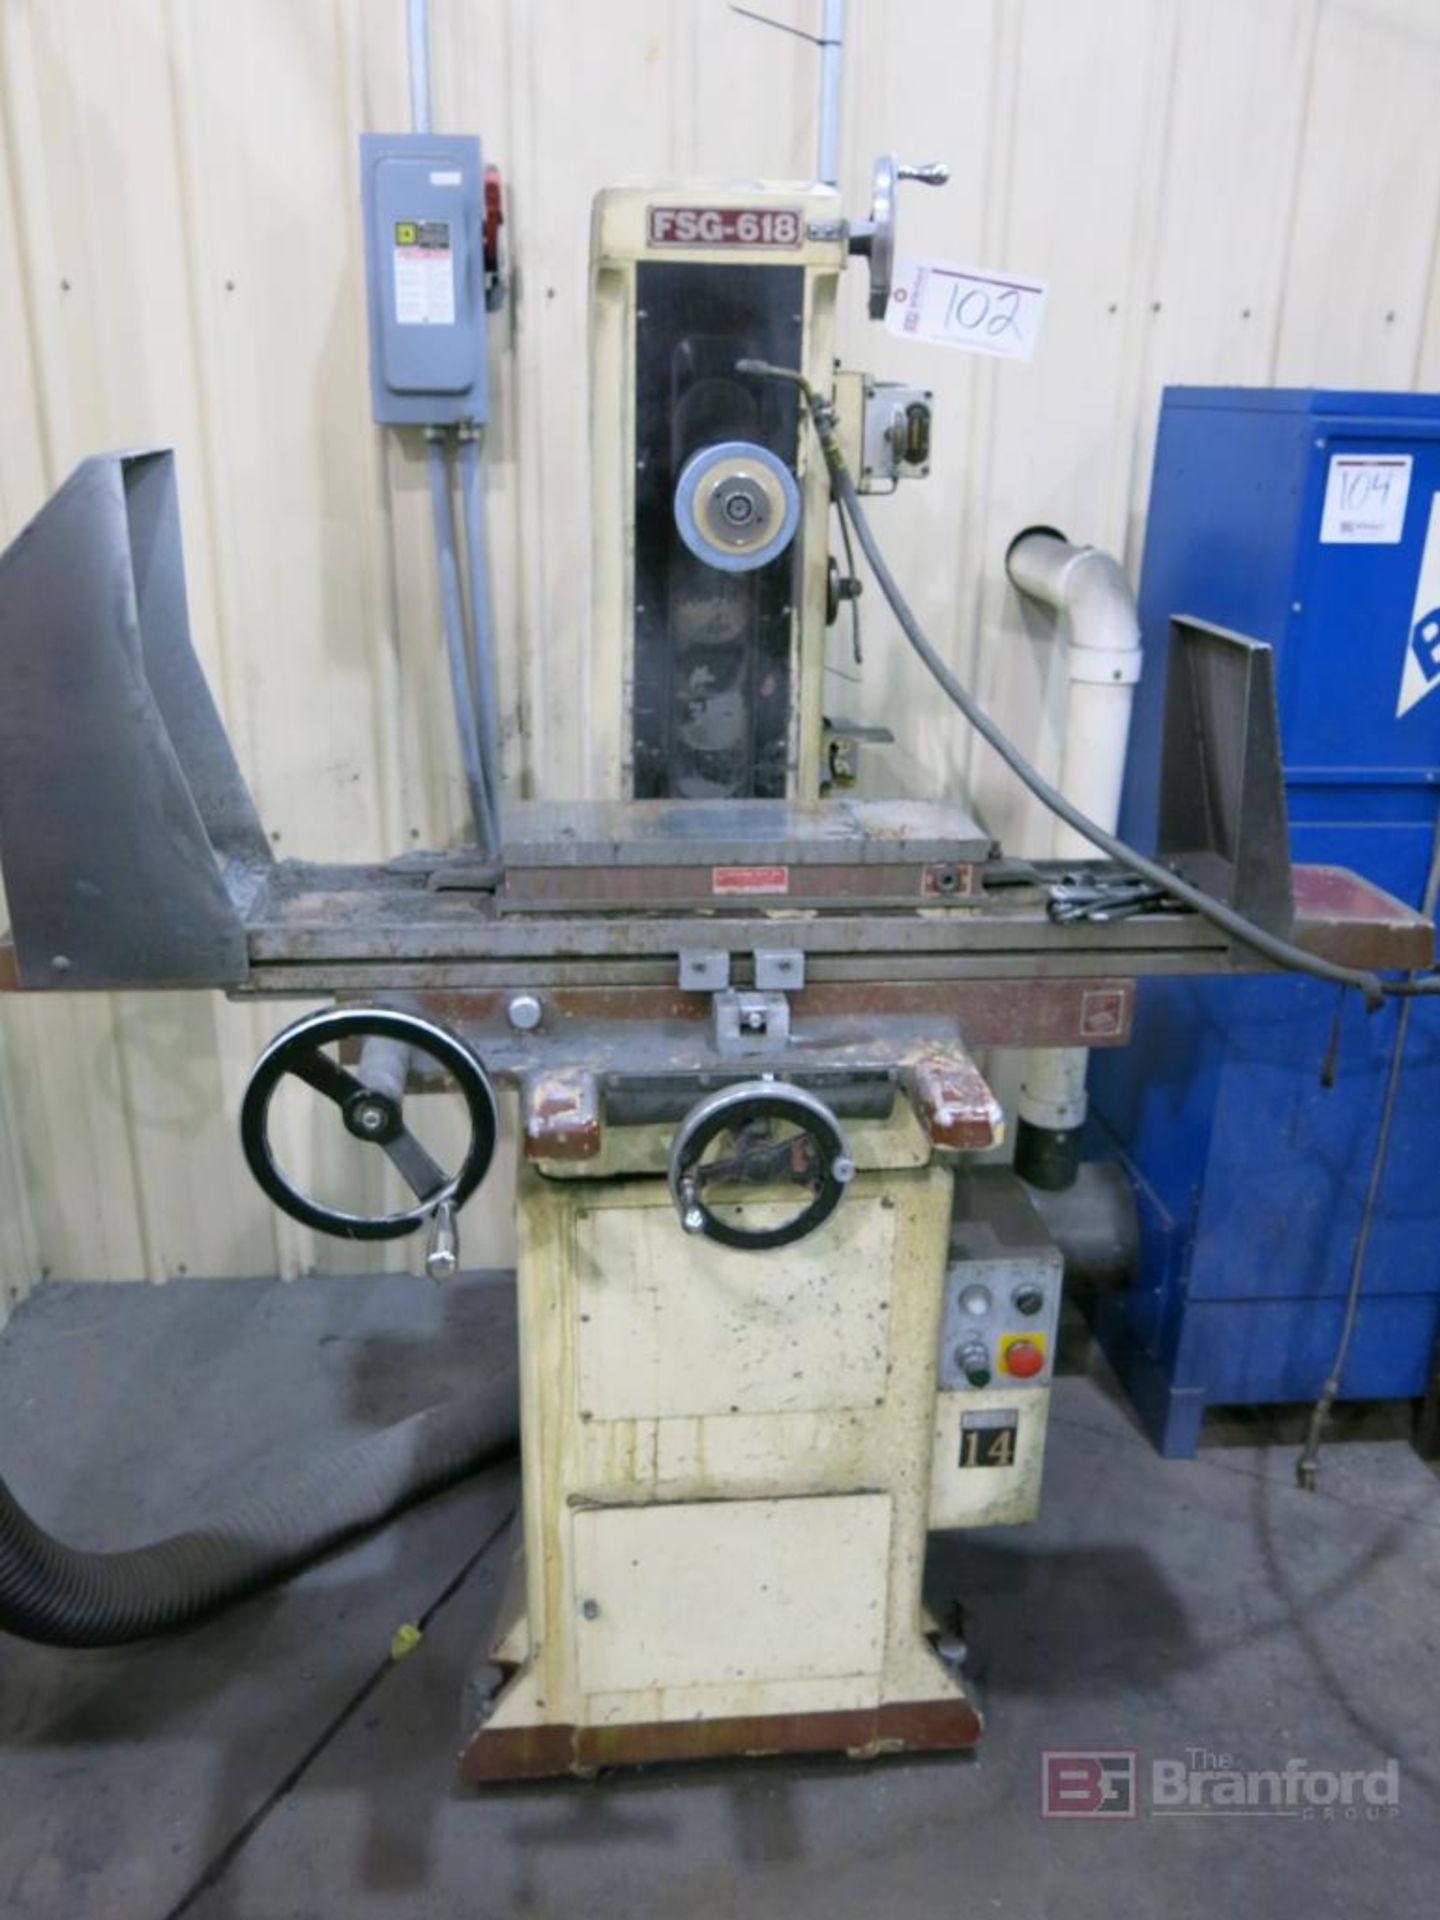 Kent Model FSG-618 Surface Grinder w/ 18" Surburban Tool Magnetic Chuck - Image 2 of 2